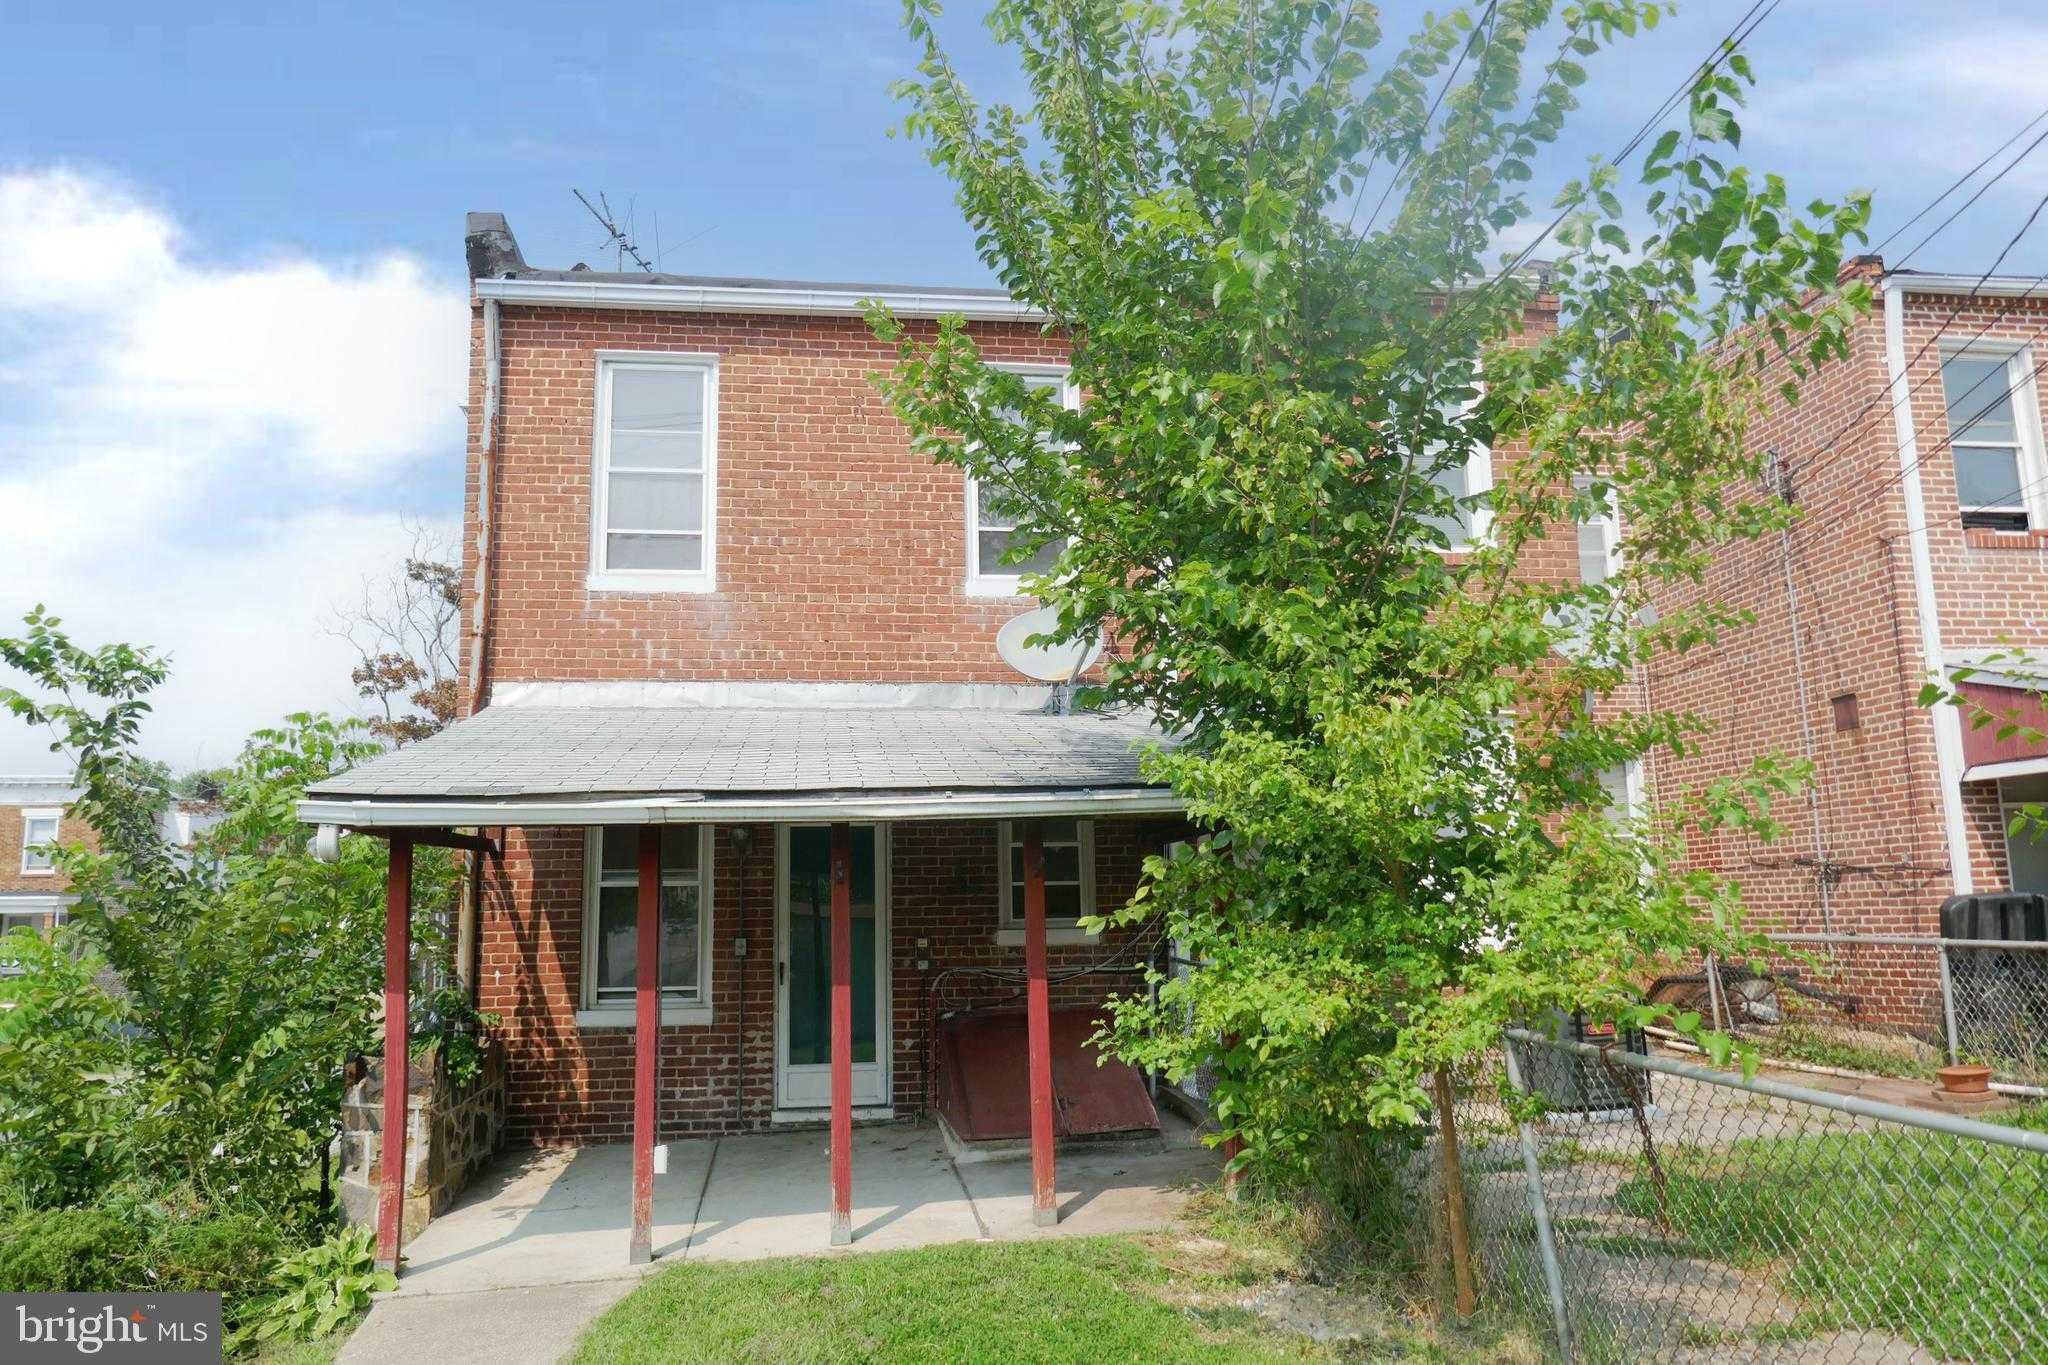 View BALTIMORE, MD 21213 townhome